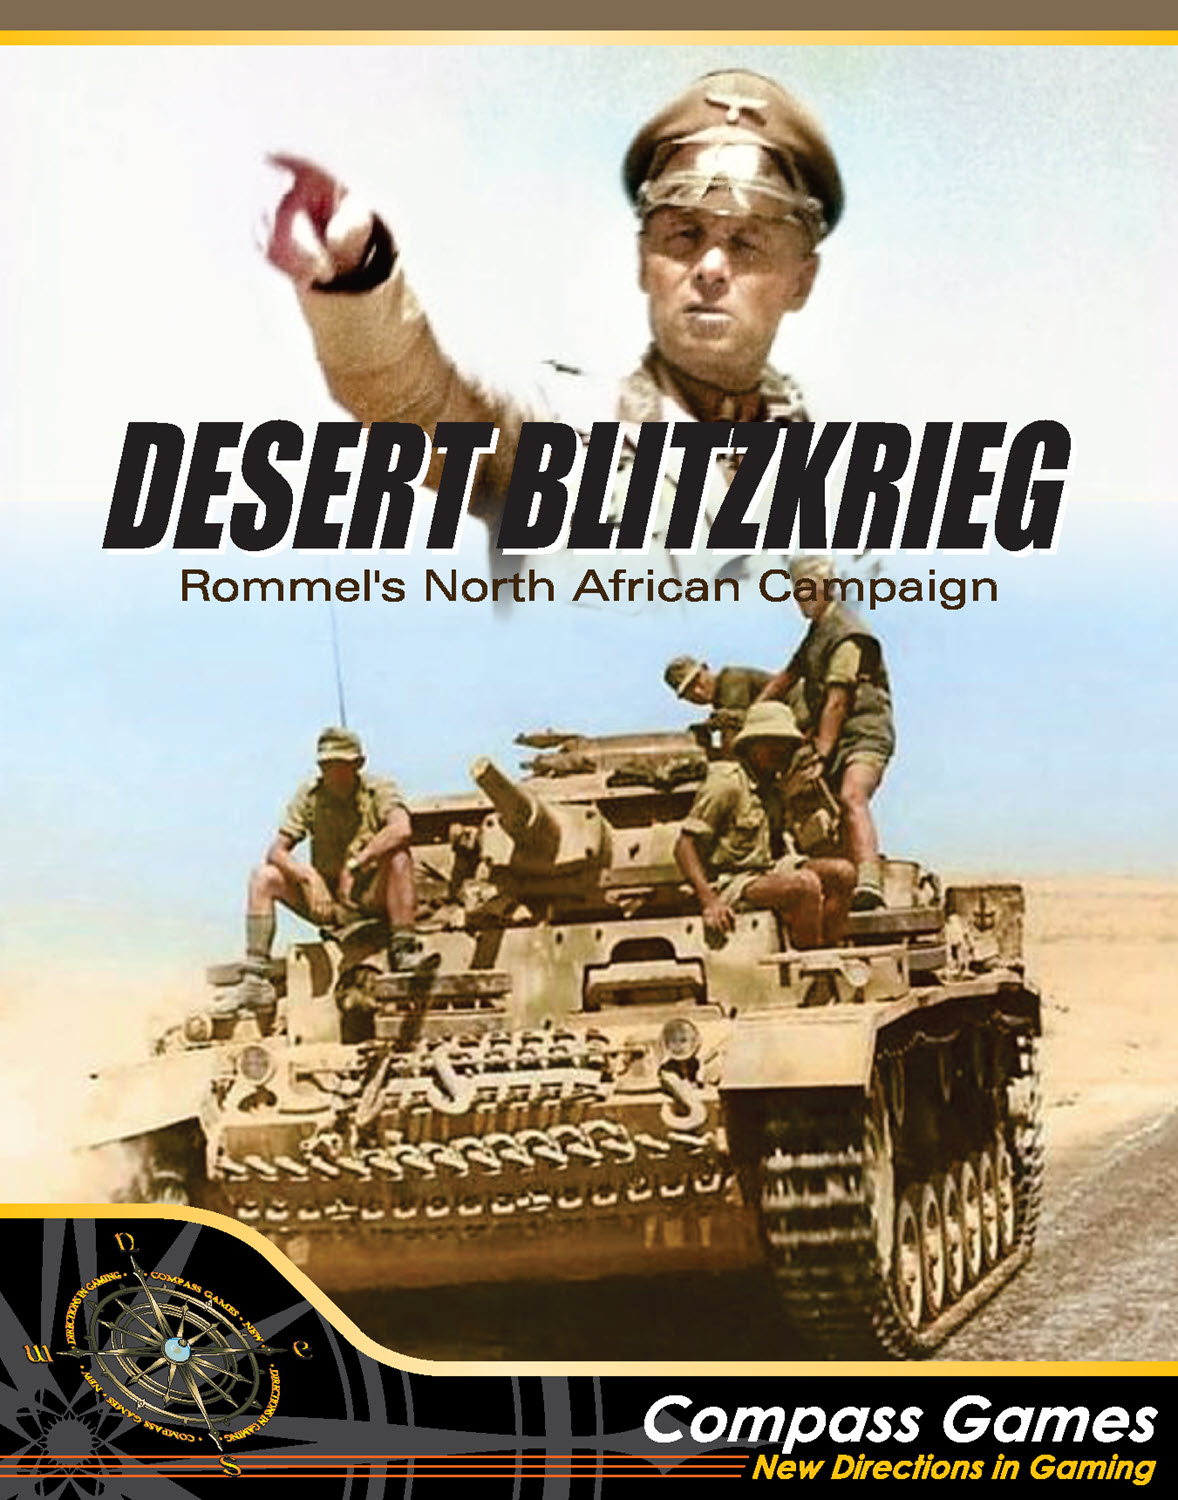 Desert Blitzkrieg: Rommel's North African Campaign (Pay Later 